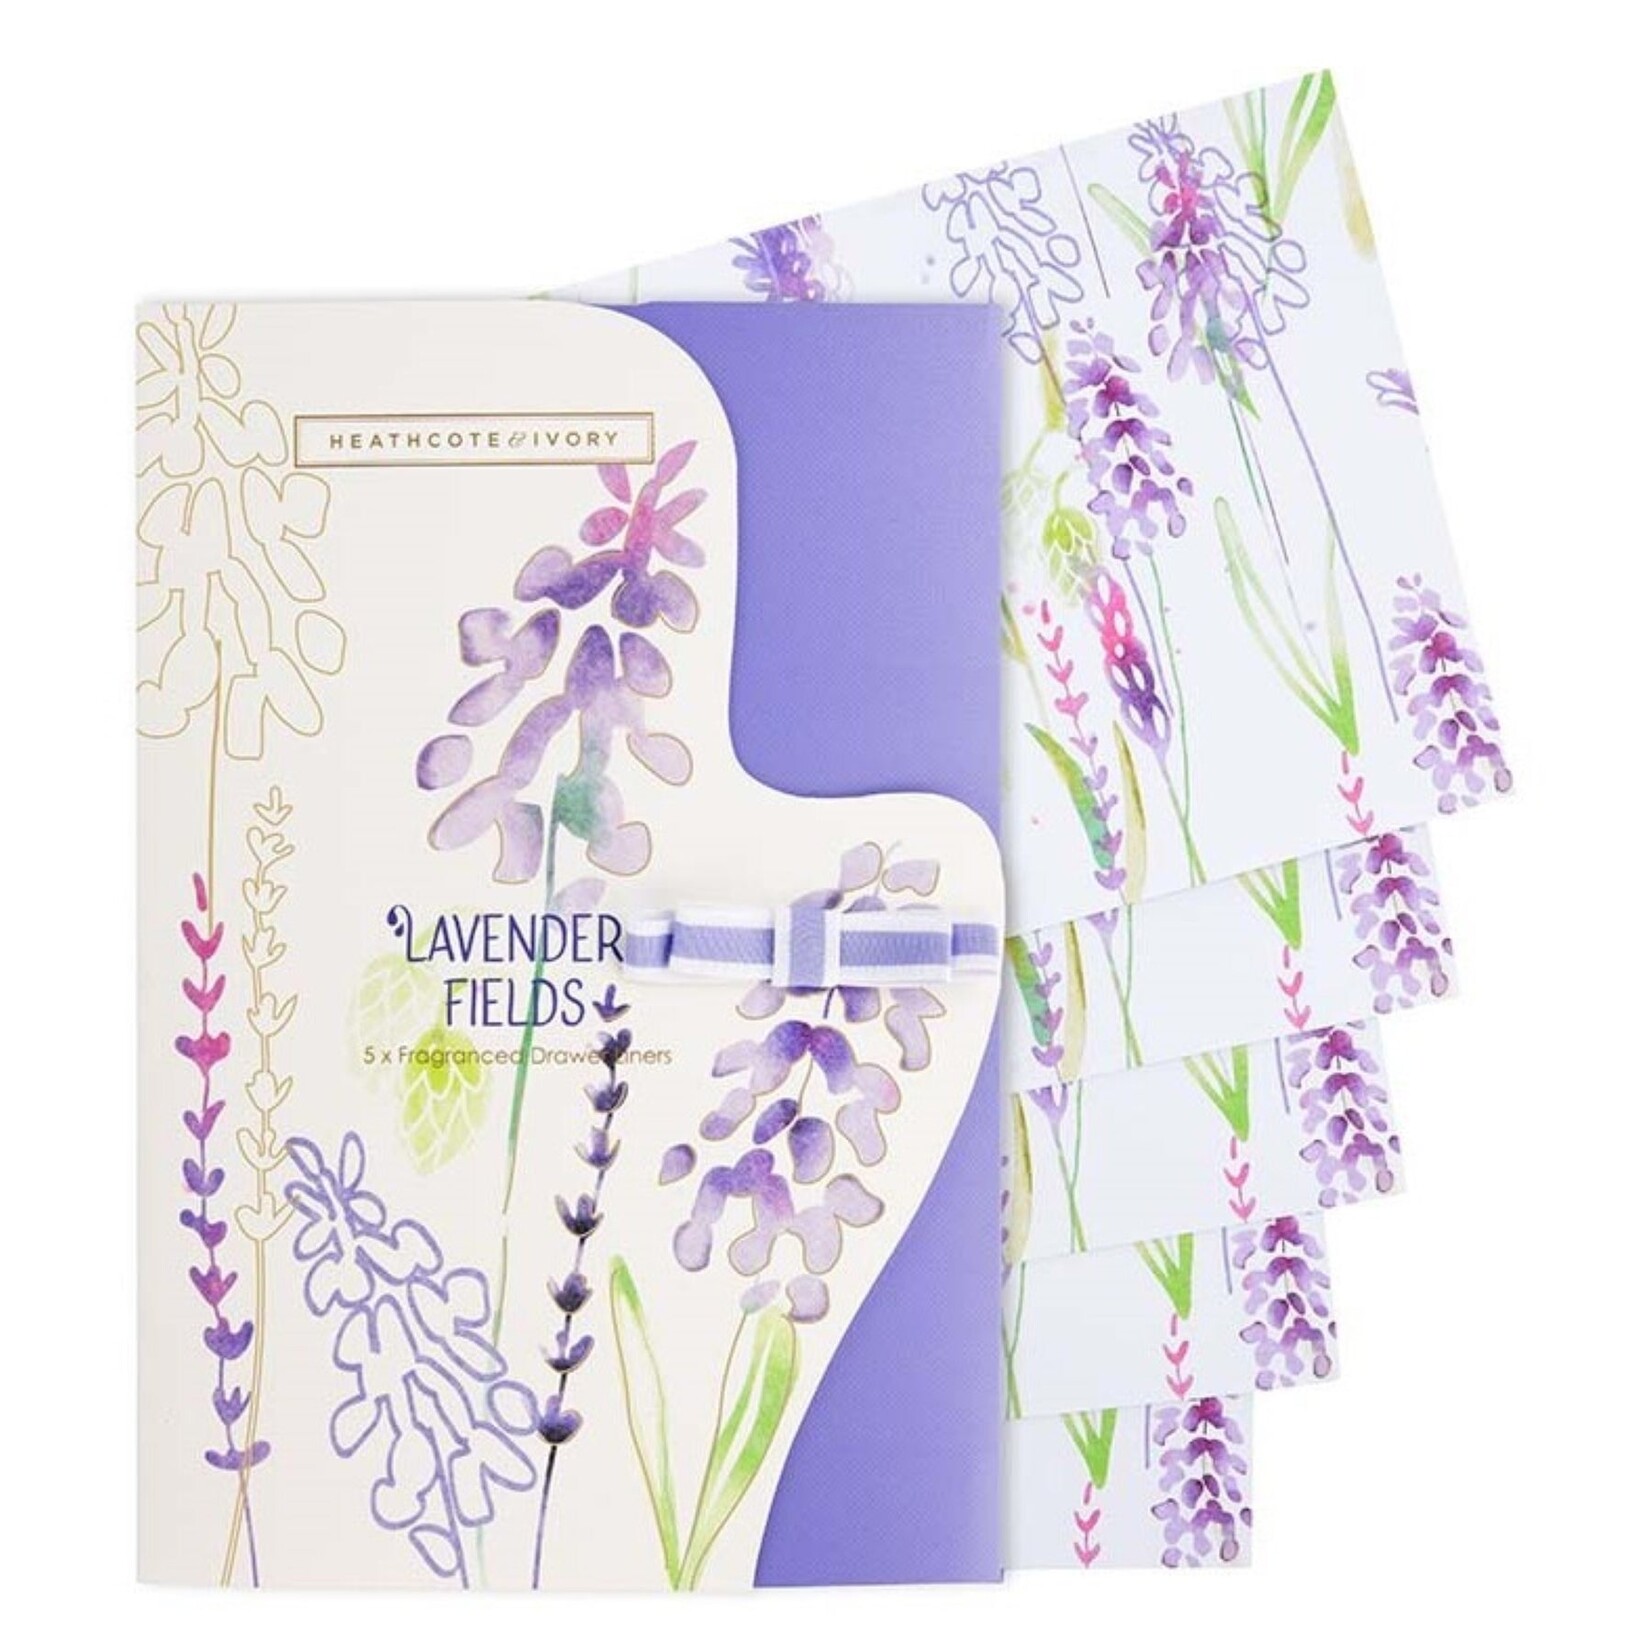 Heathcote & Ivory Lavender Fields Scented Drawer Liner